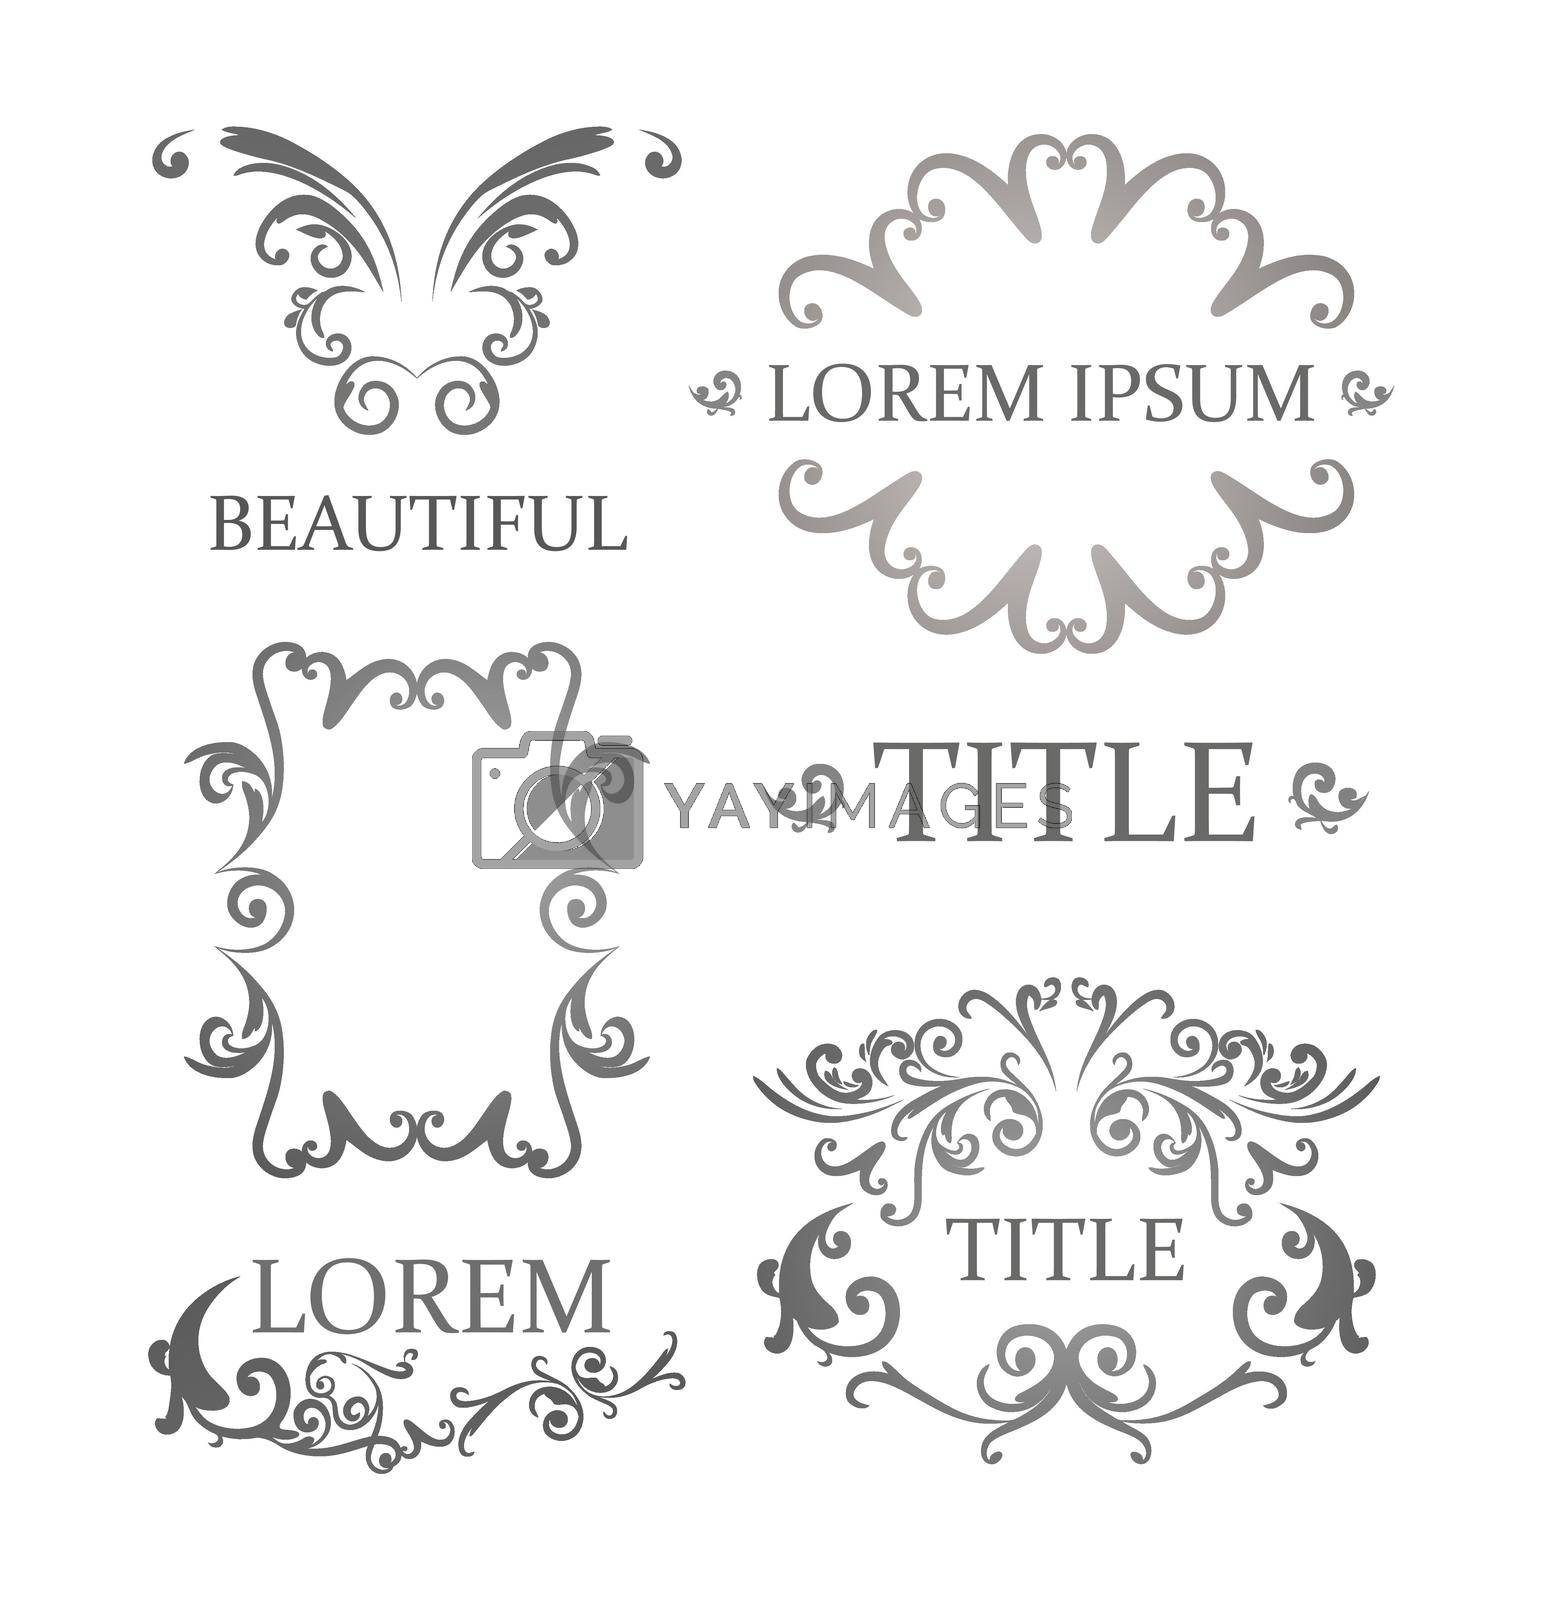 Royalty free image of Decorative Calligrafic Ornaments by macroarting